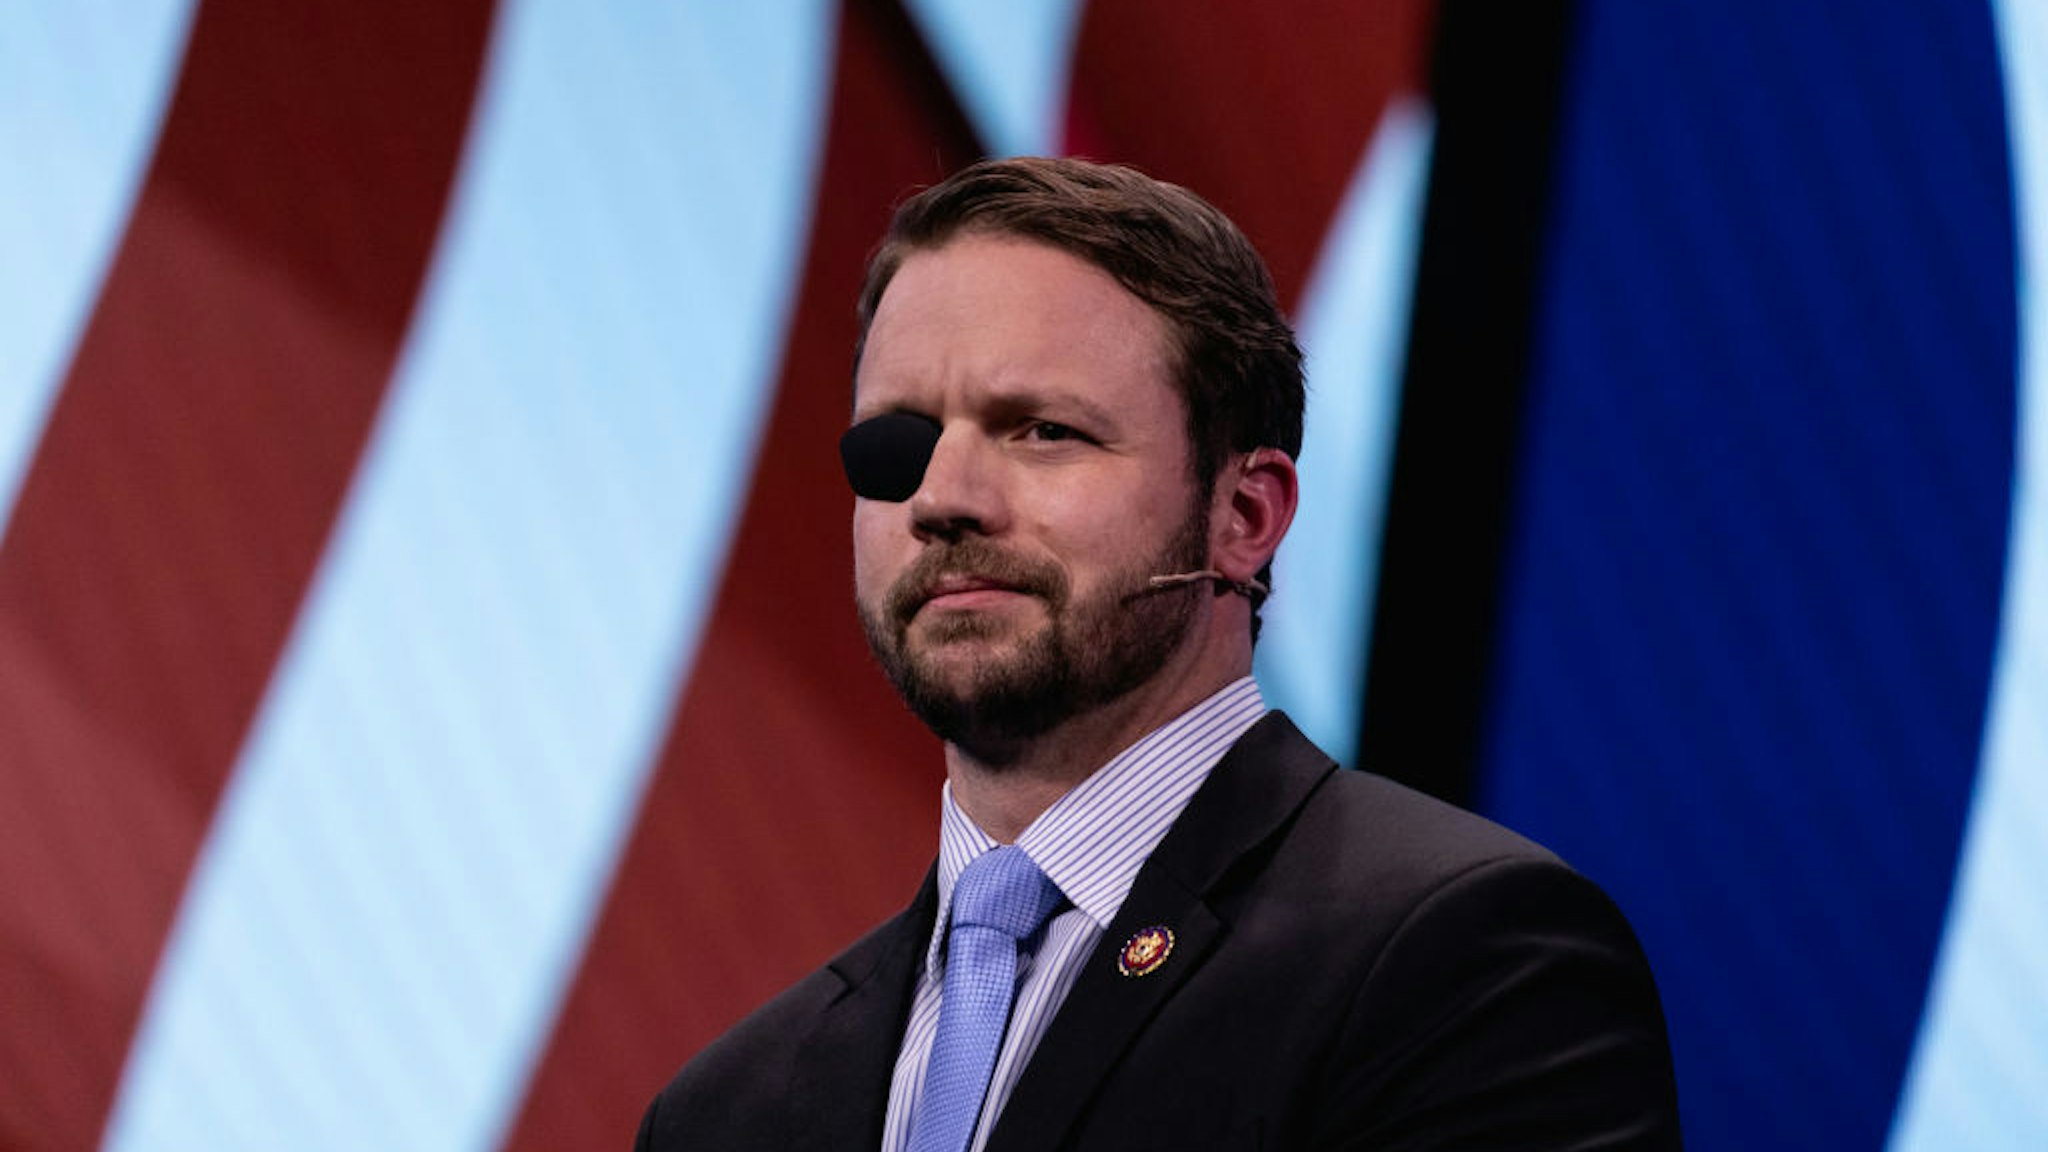 Rep. Dan Crenshaw speaks at the 2019 American Israel Public Affairs Committee Policy Conference